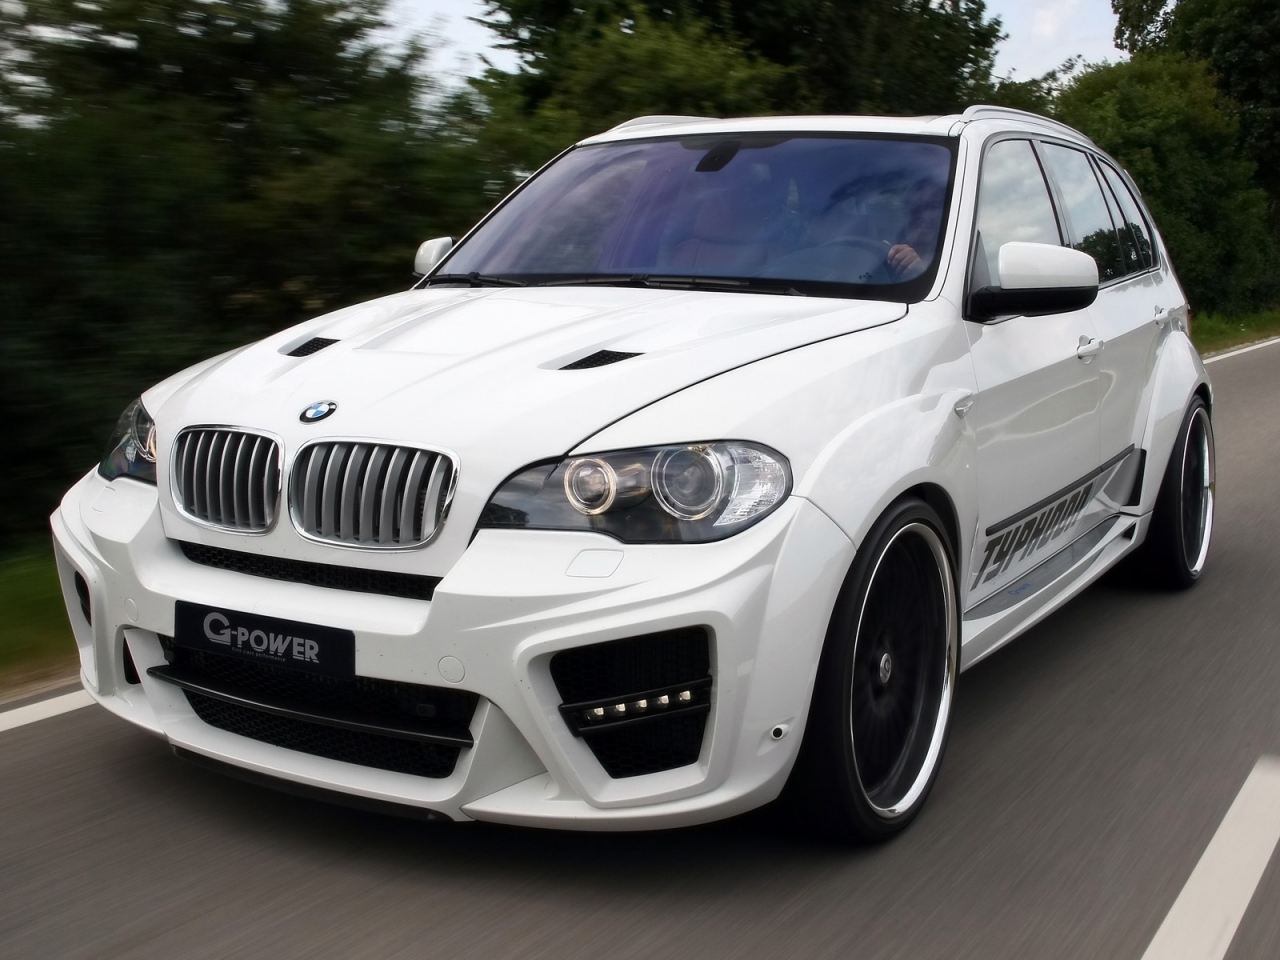 BMW X5 Typhoon RS 2010 G Power for 1280 x 960 resolution